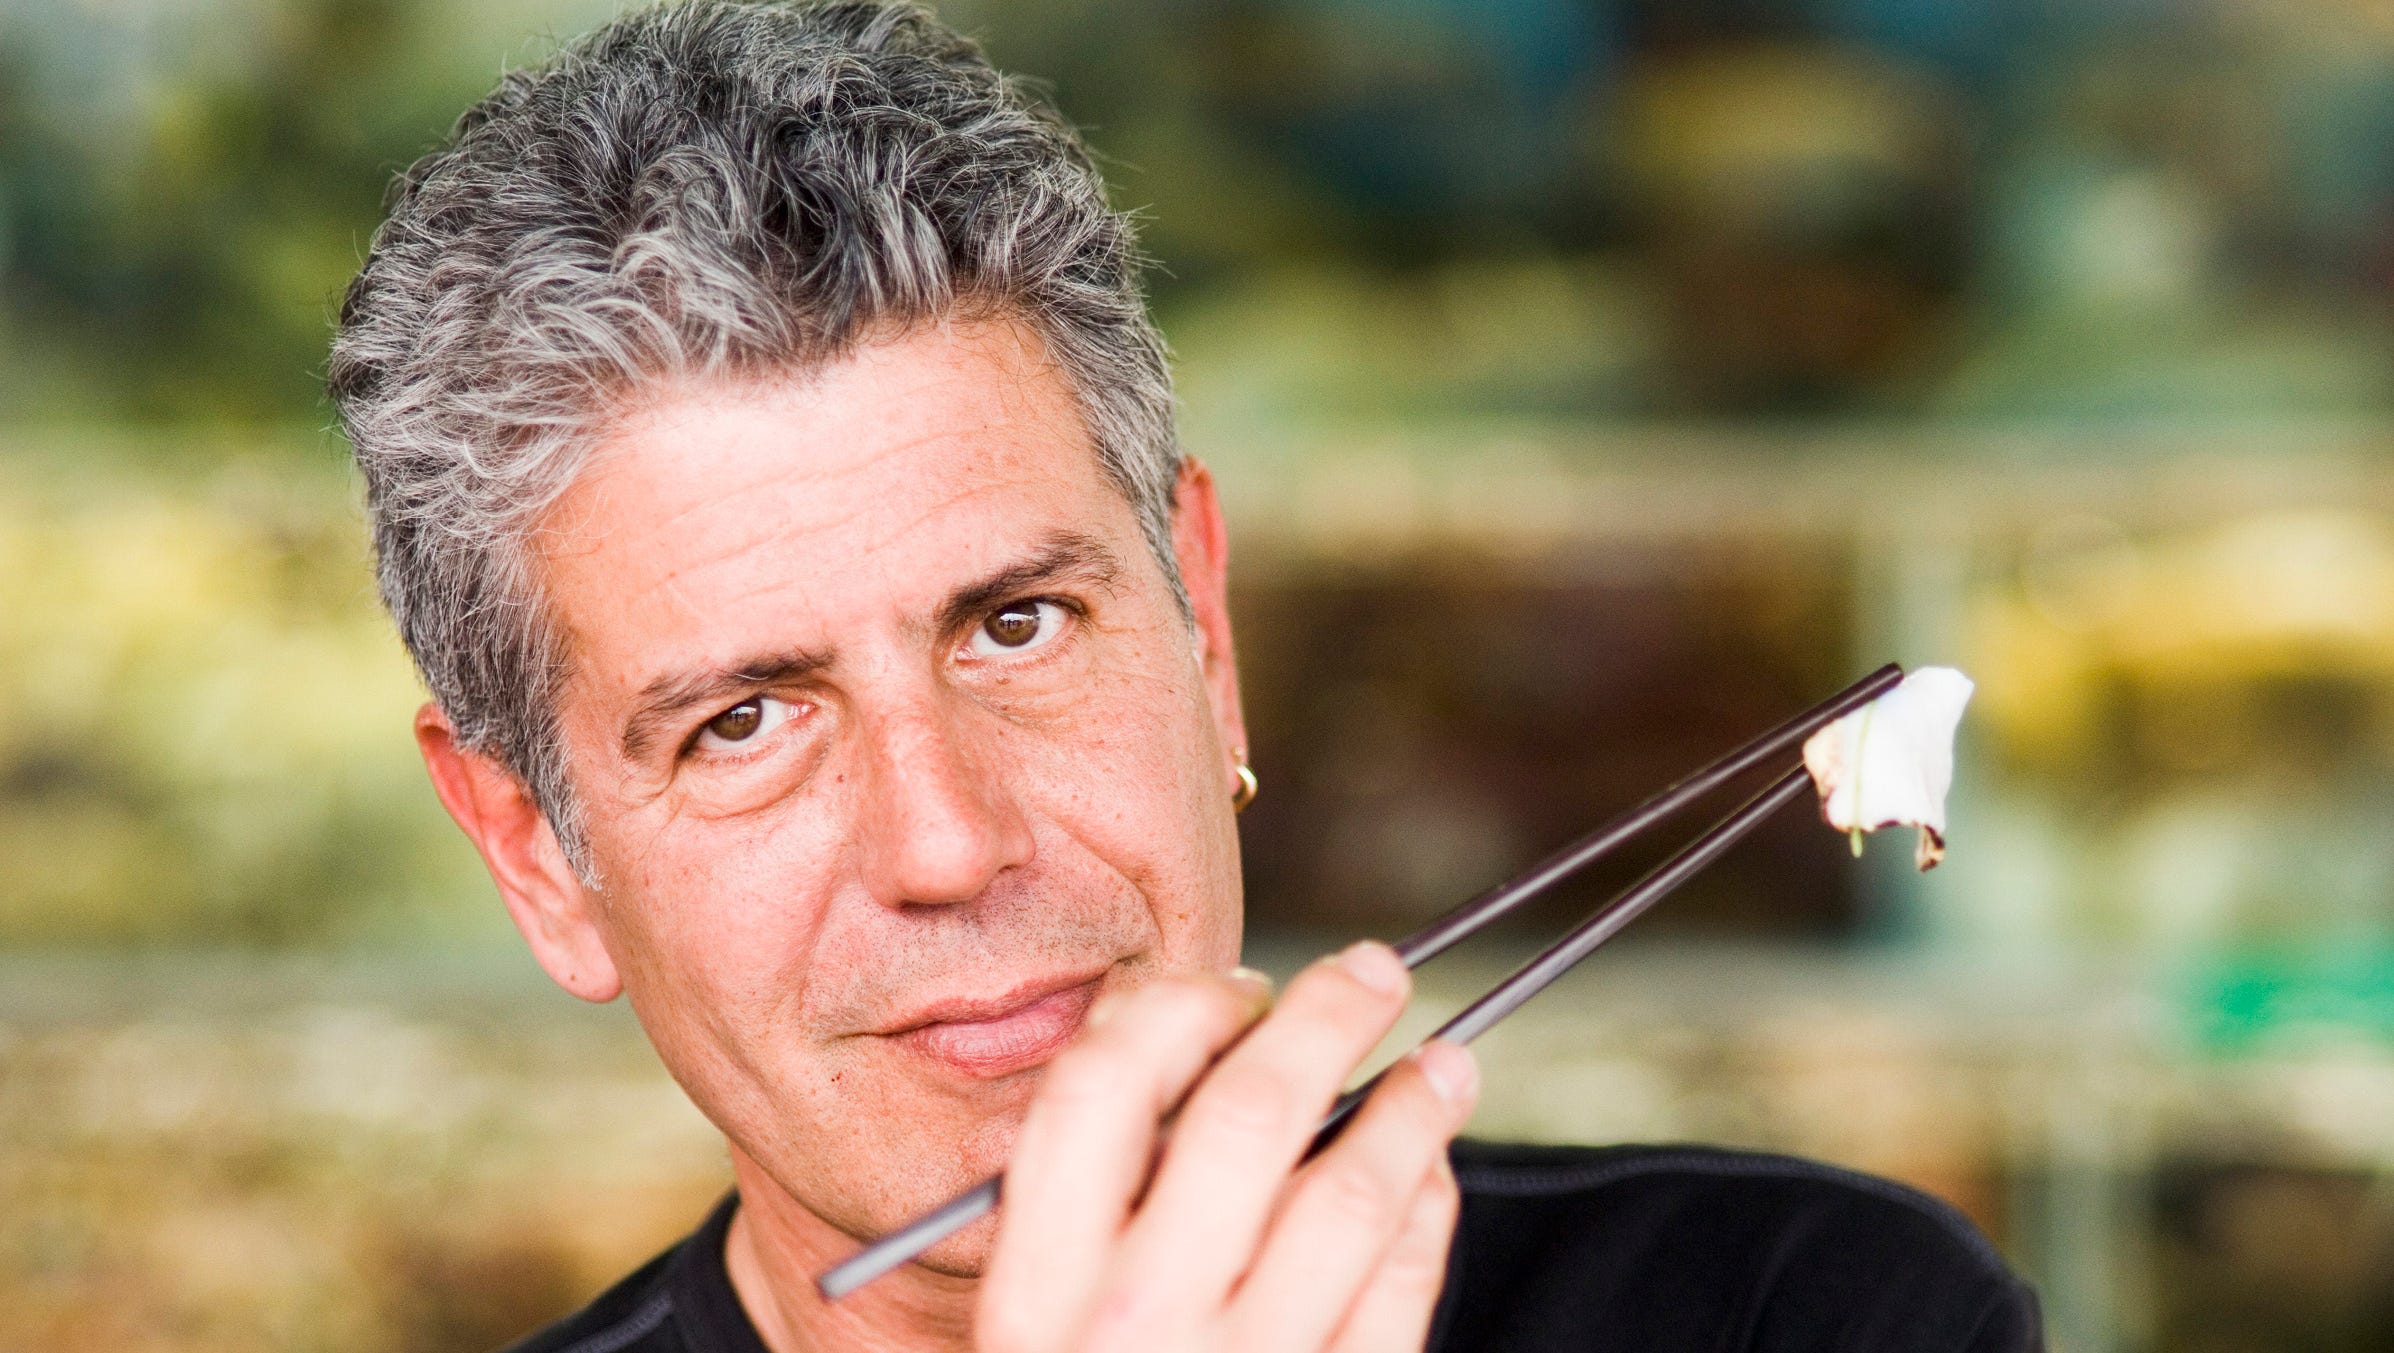 Anthony Bourdain suicide: Asheville chefs talk of industry's perils